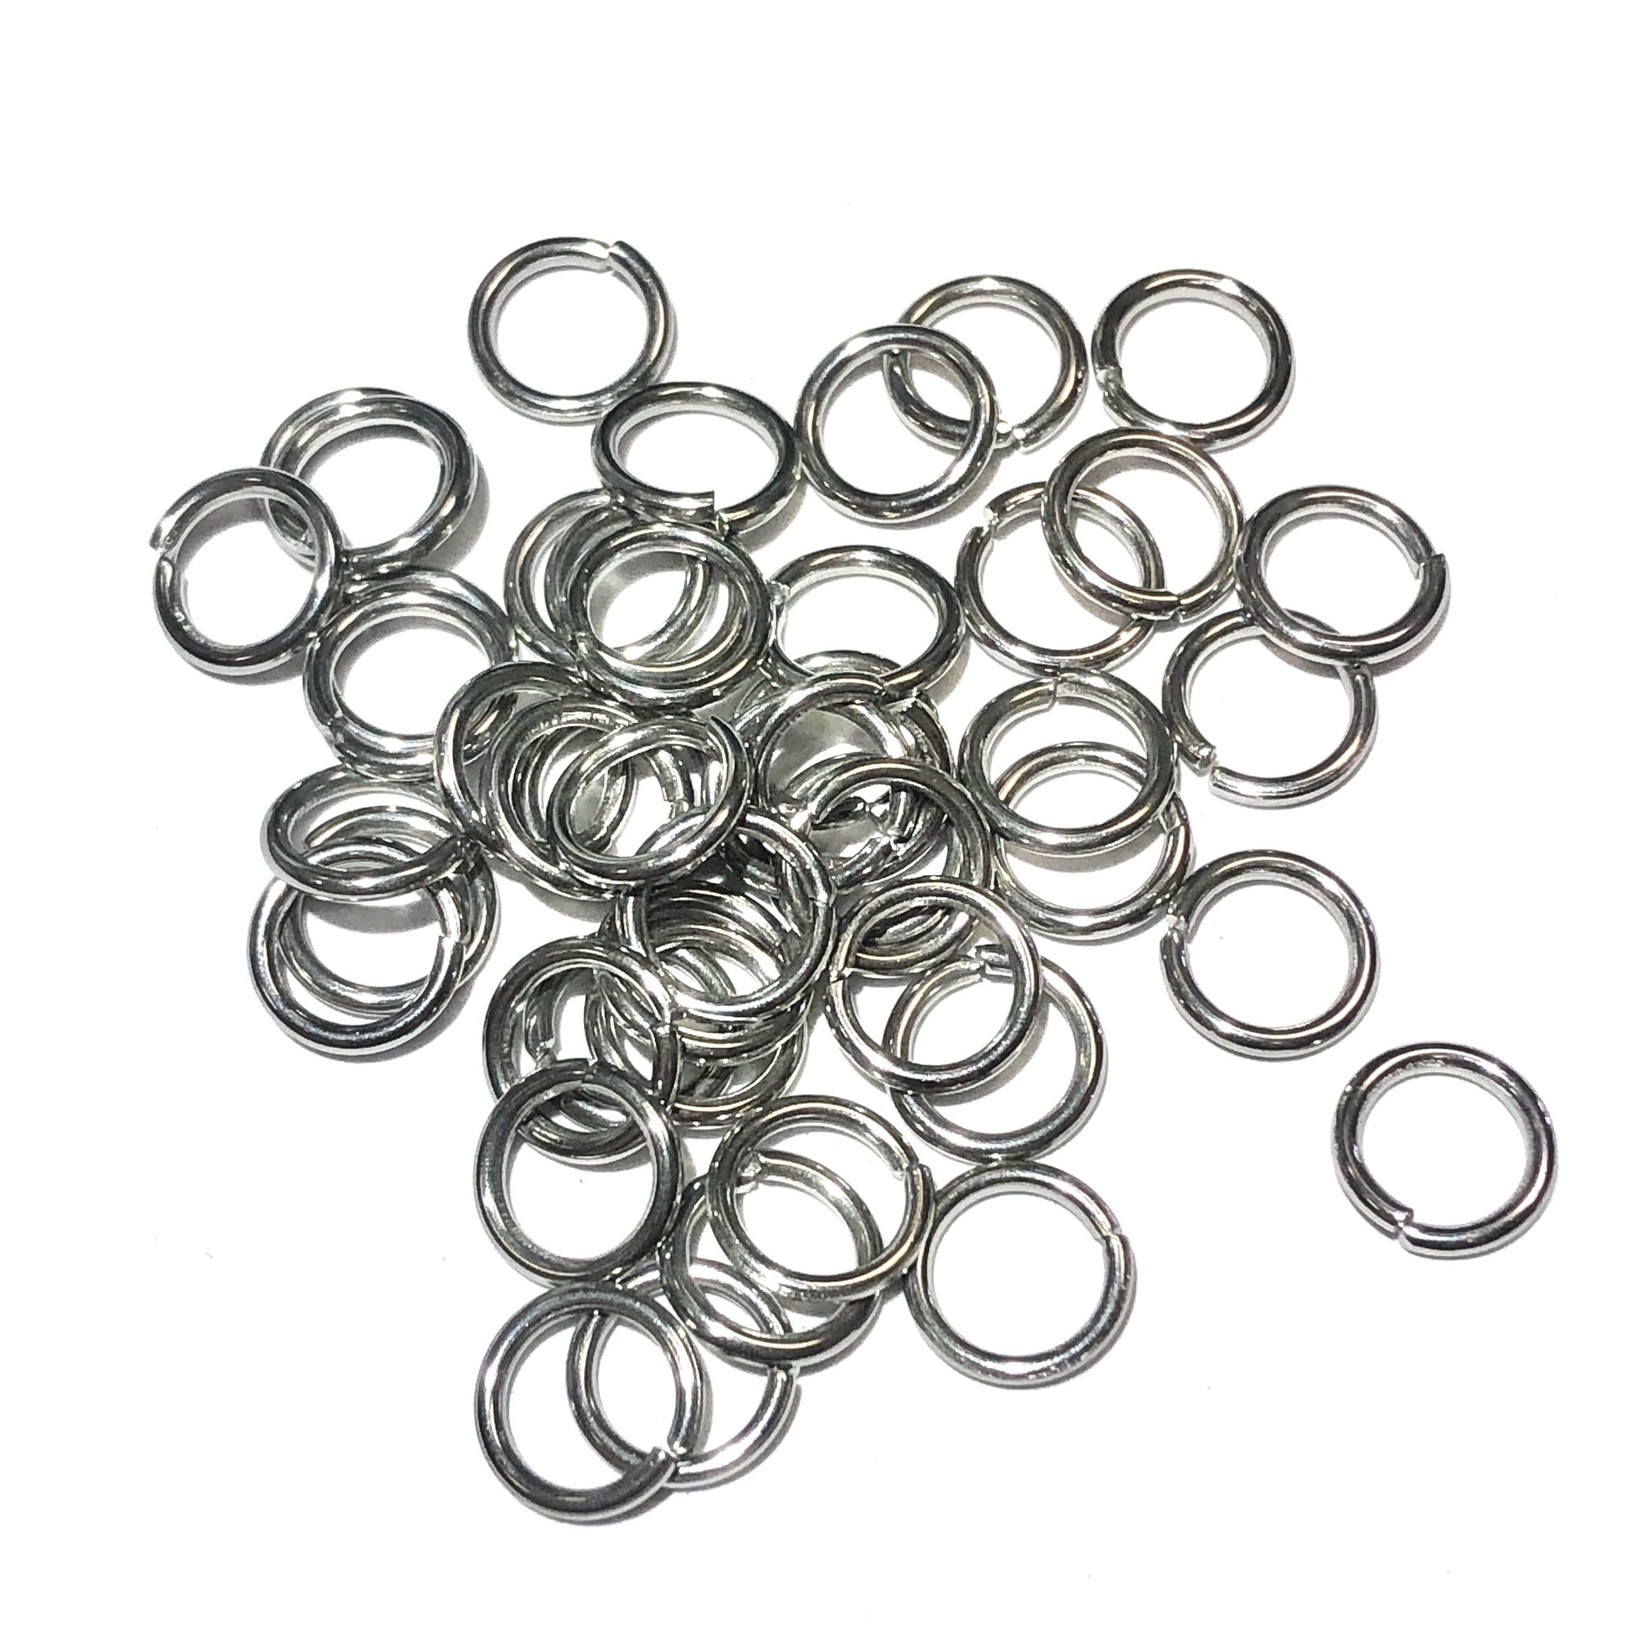 Stainless Steel 18Ga SWG Jump Rings 7x1mm 100pcs